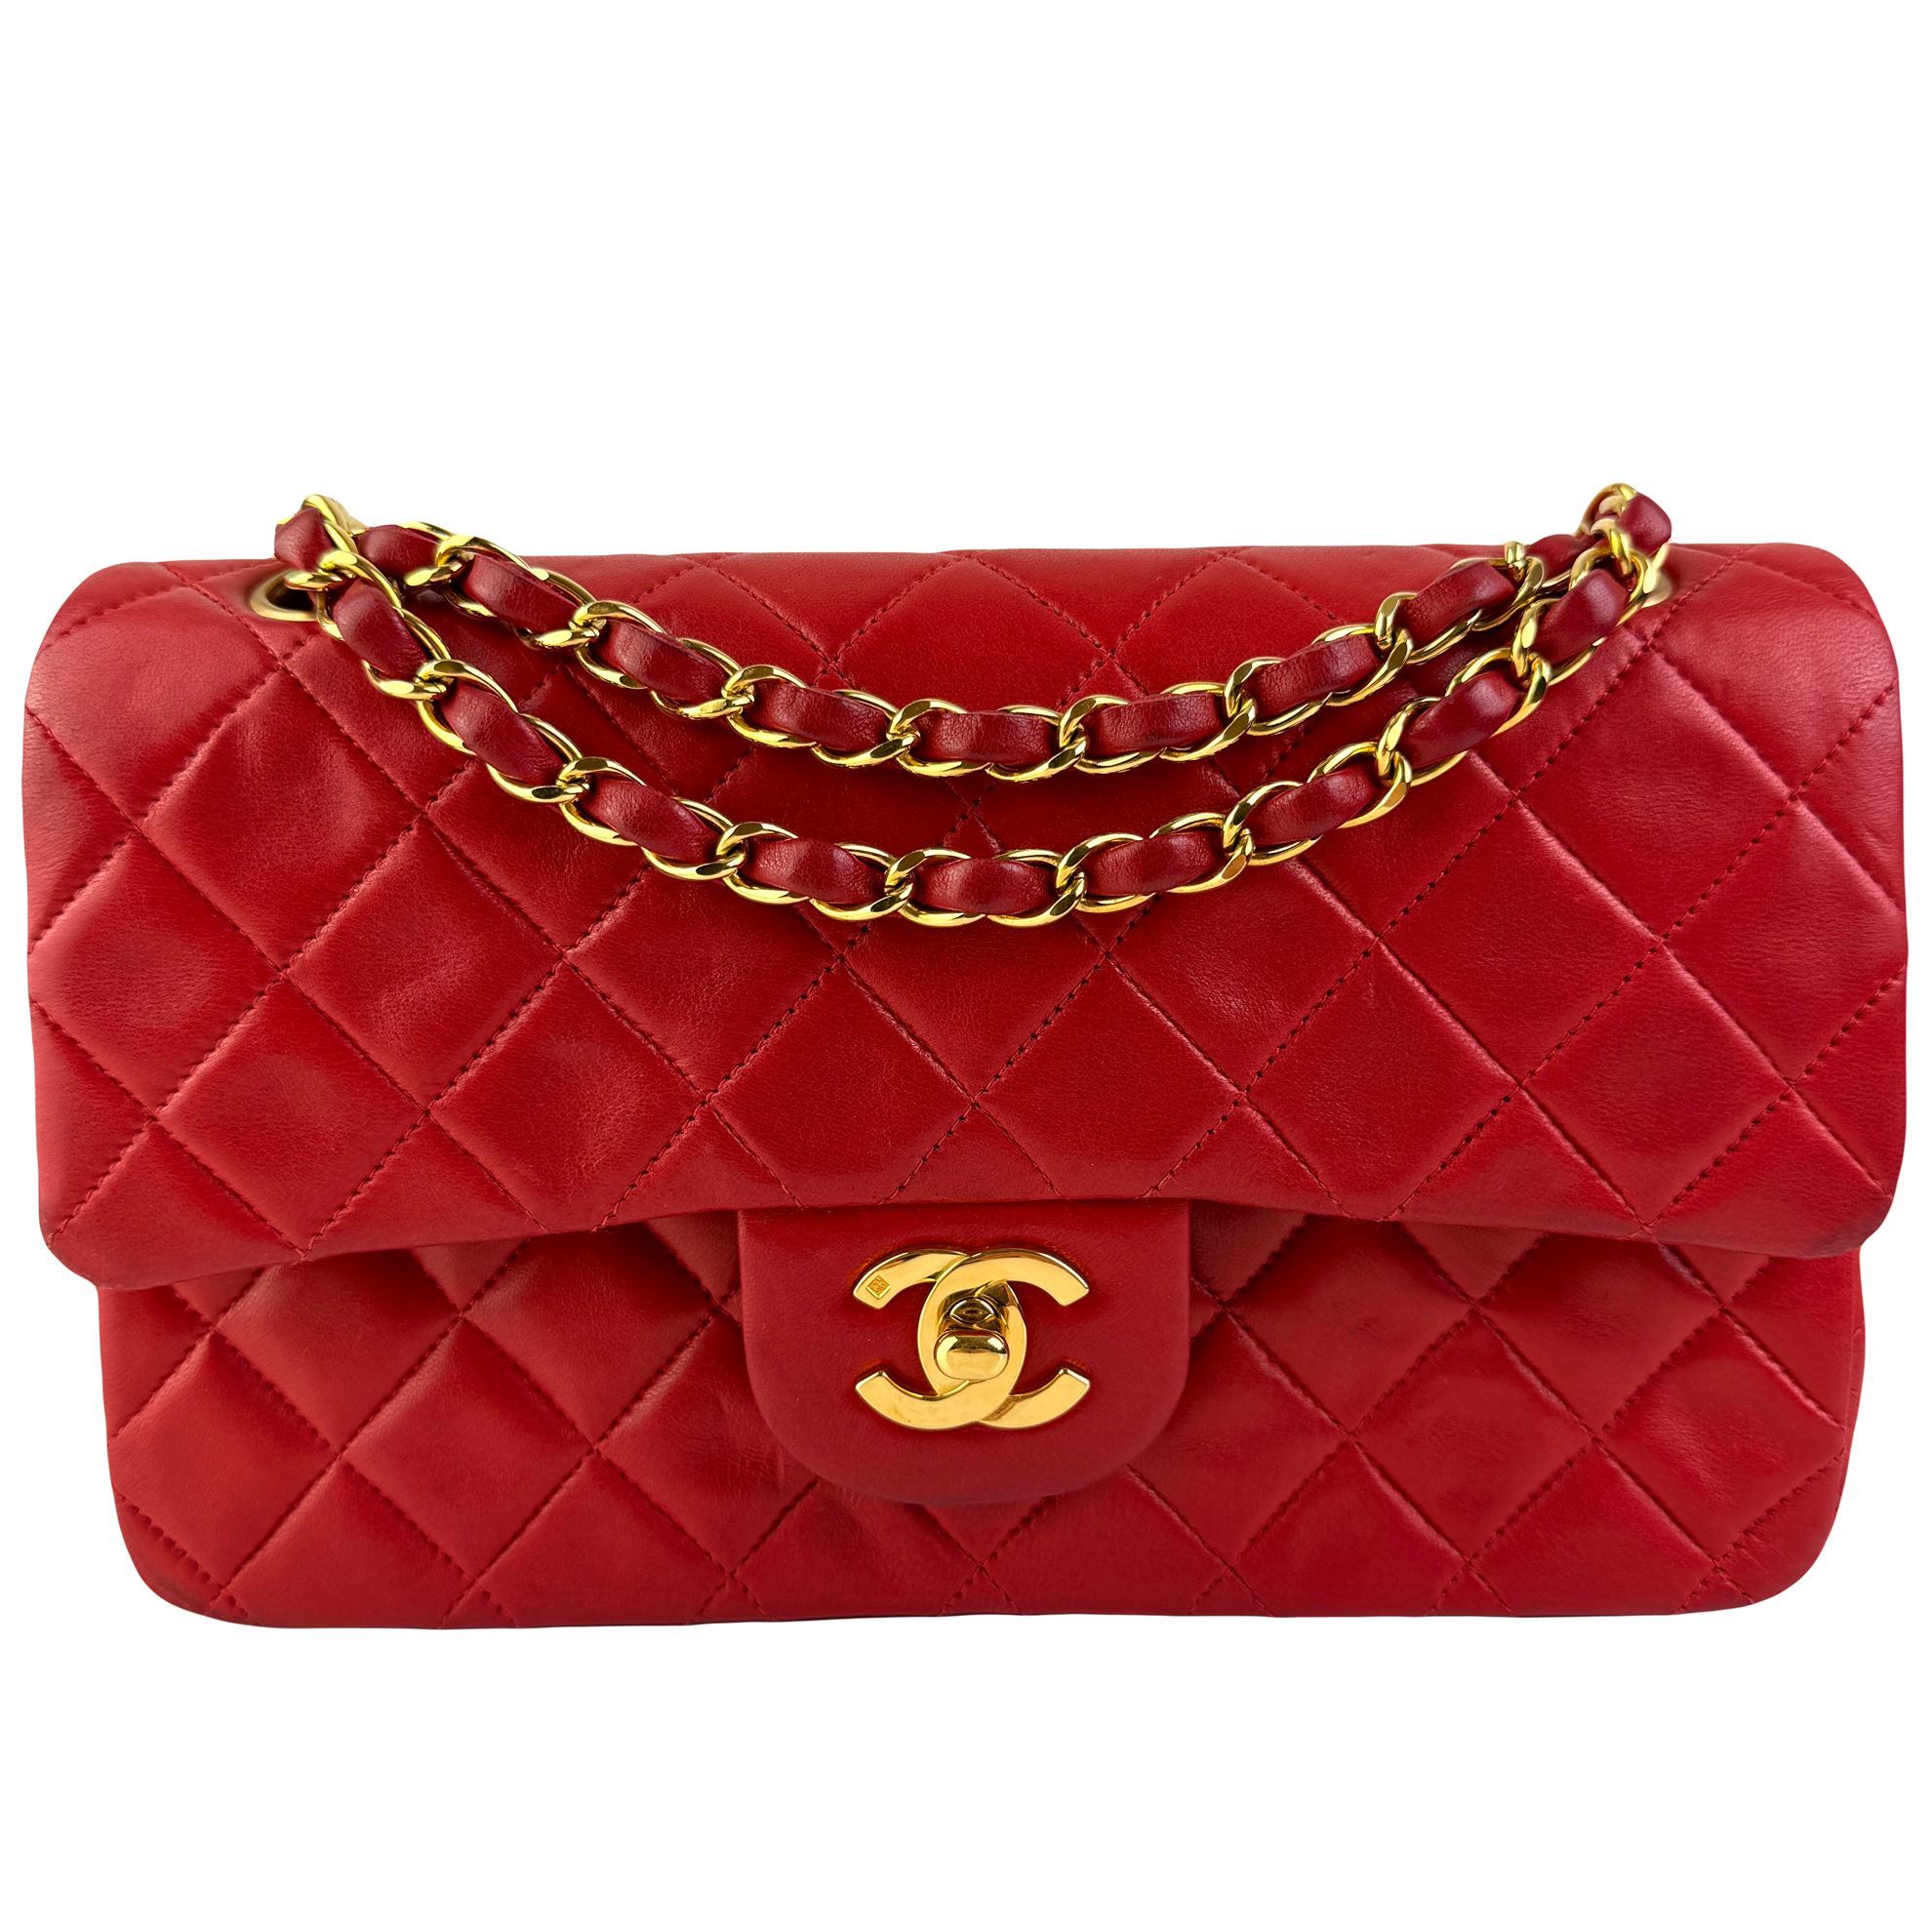 Picture of Chanel small red 2.55 timeless classic double flap bag VM221282